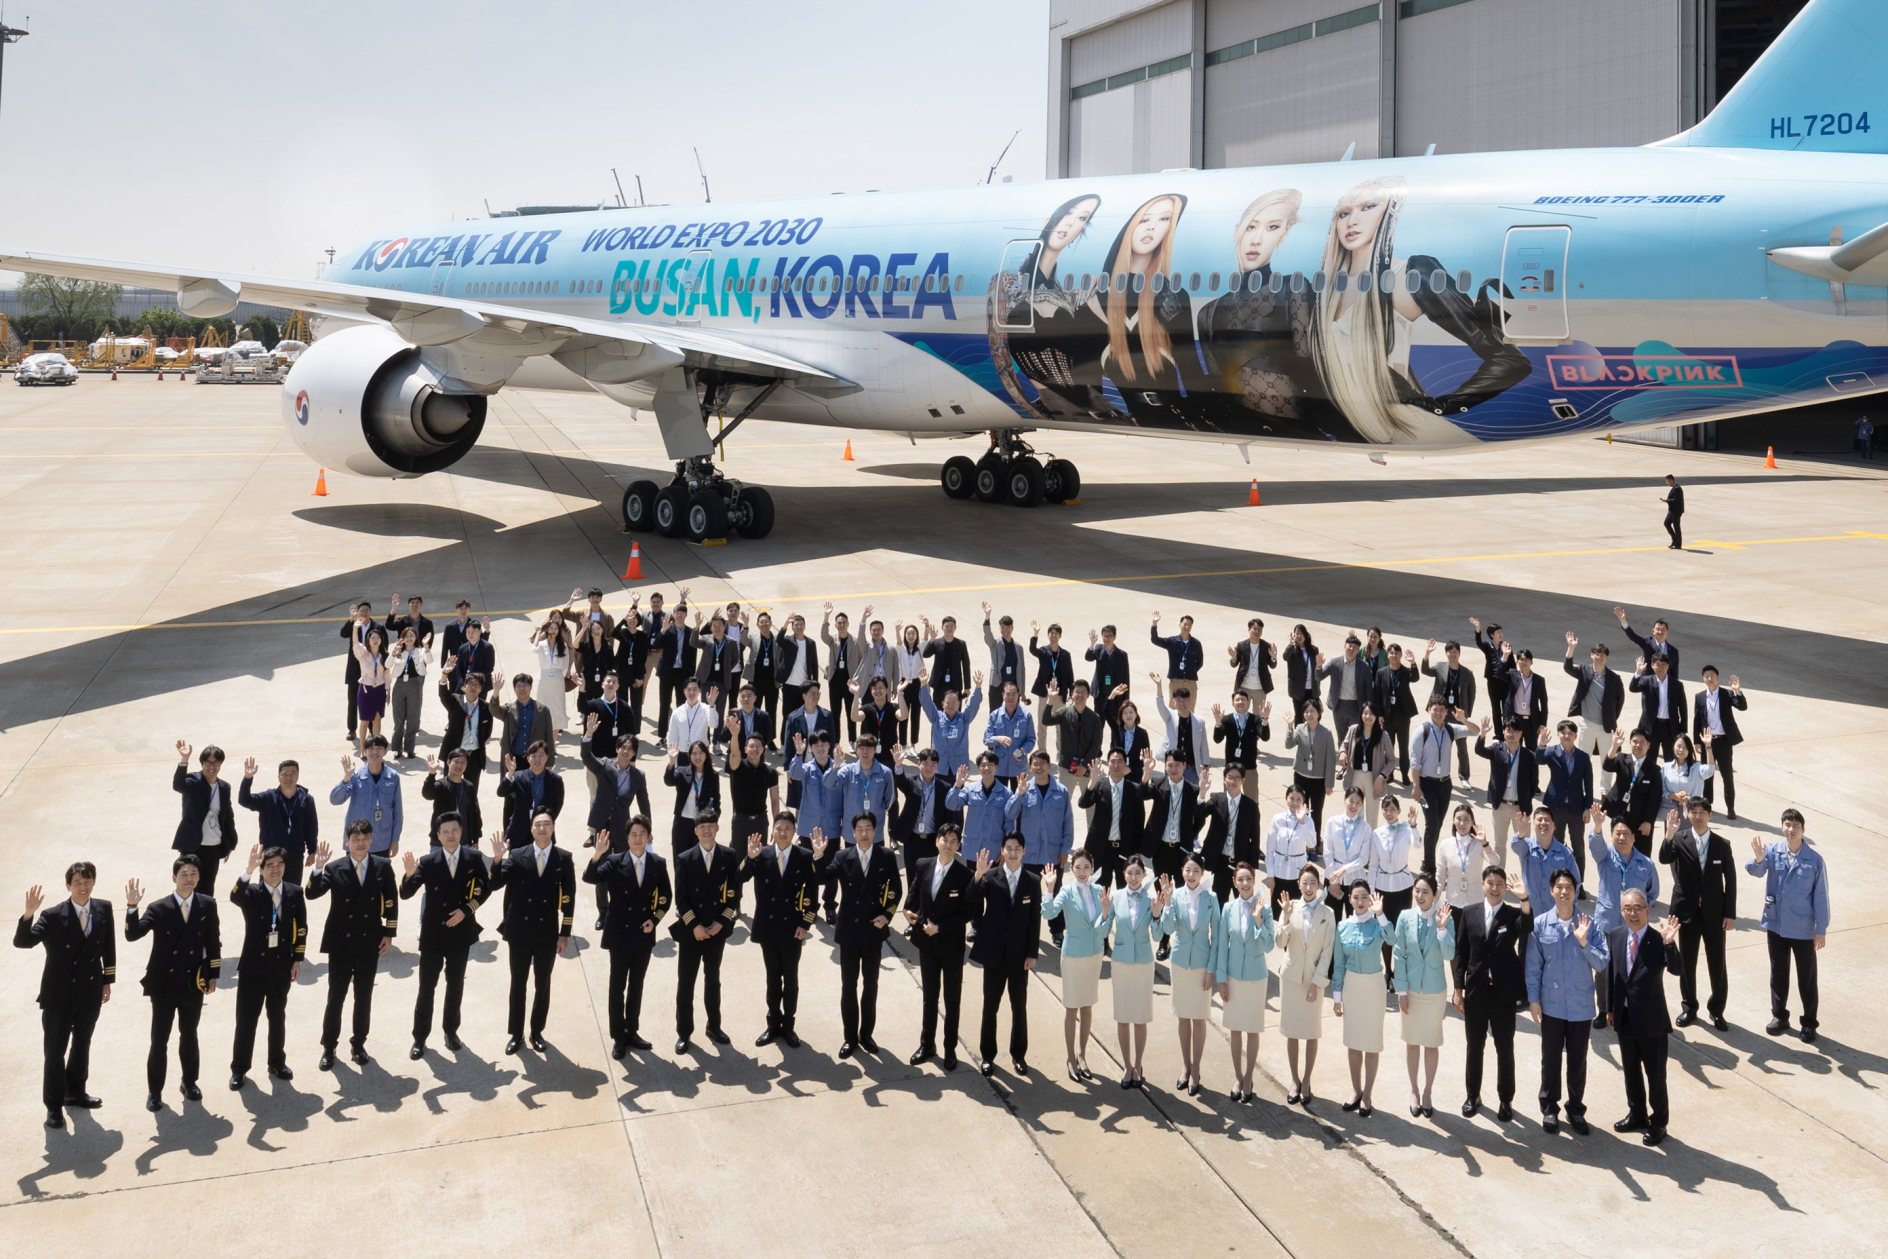 Korean Air's Blackpink livery has been created in support of Busan's bid to host World Expo 2030. Click to enlarge.